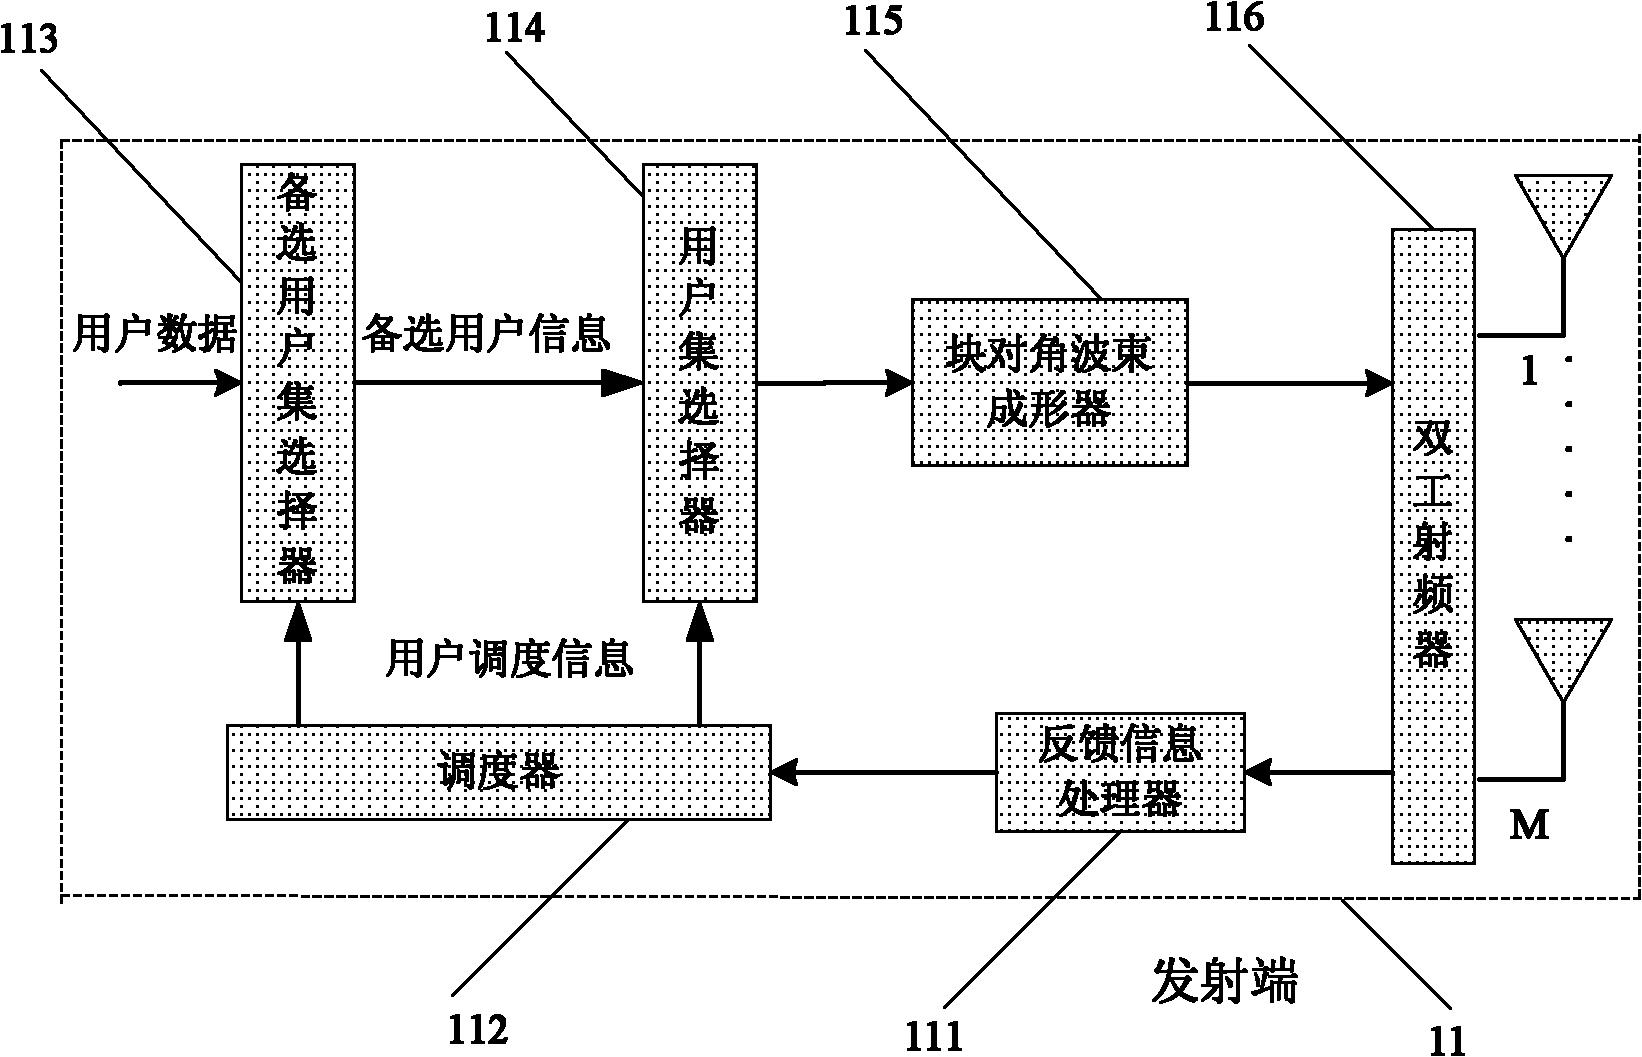 Multiuser MIMO (multiple-input multiple-output) downlink transmitting and dispatching method